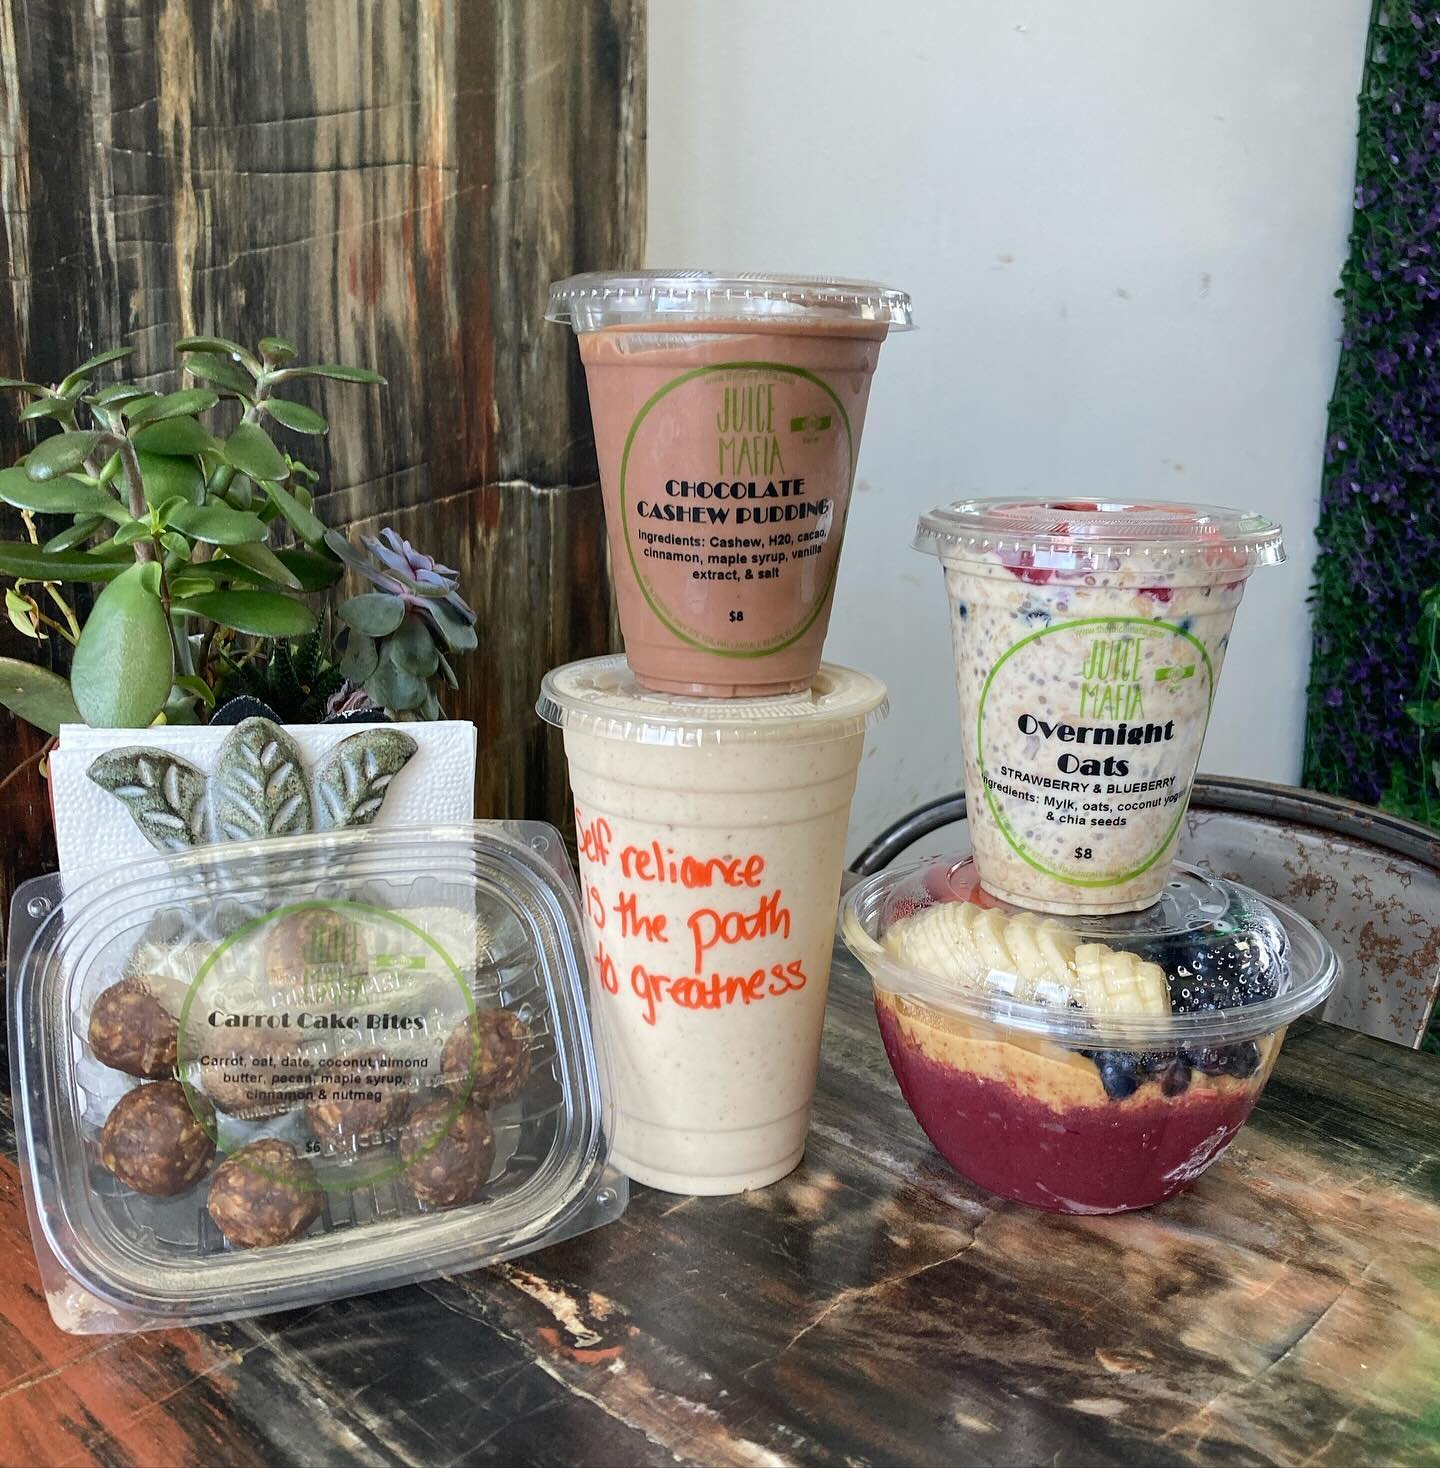 Who else might be in need of healthy options today to cure their Mother&rsquo;s Day indulgent decisions yesterday? 

Try our a&ccedil;a&iacute; bowls, smoothies, cold pressed juices, protein shakes or our famous Mafia snacks and start your work week 